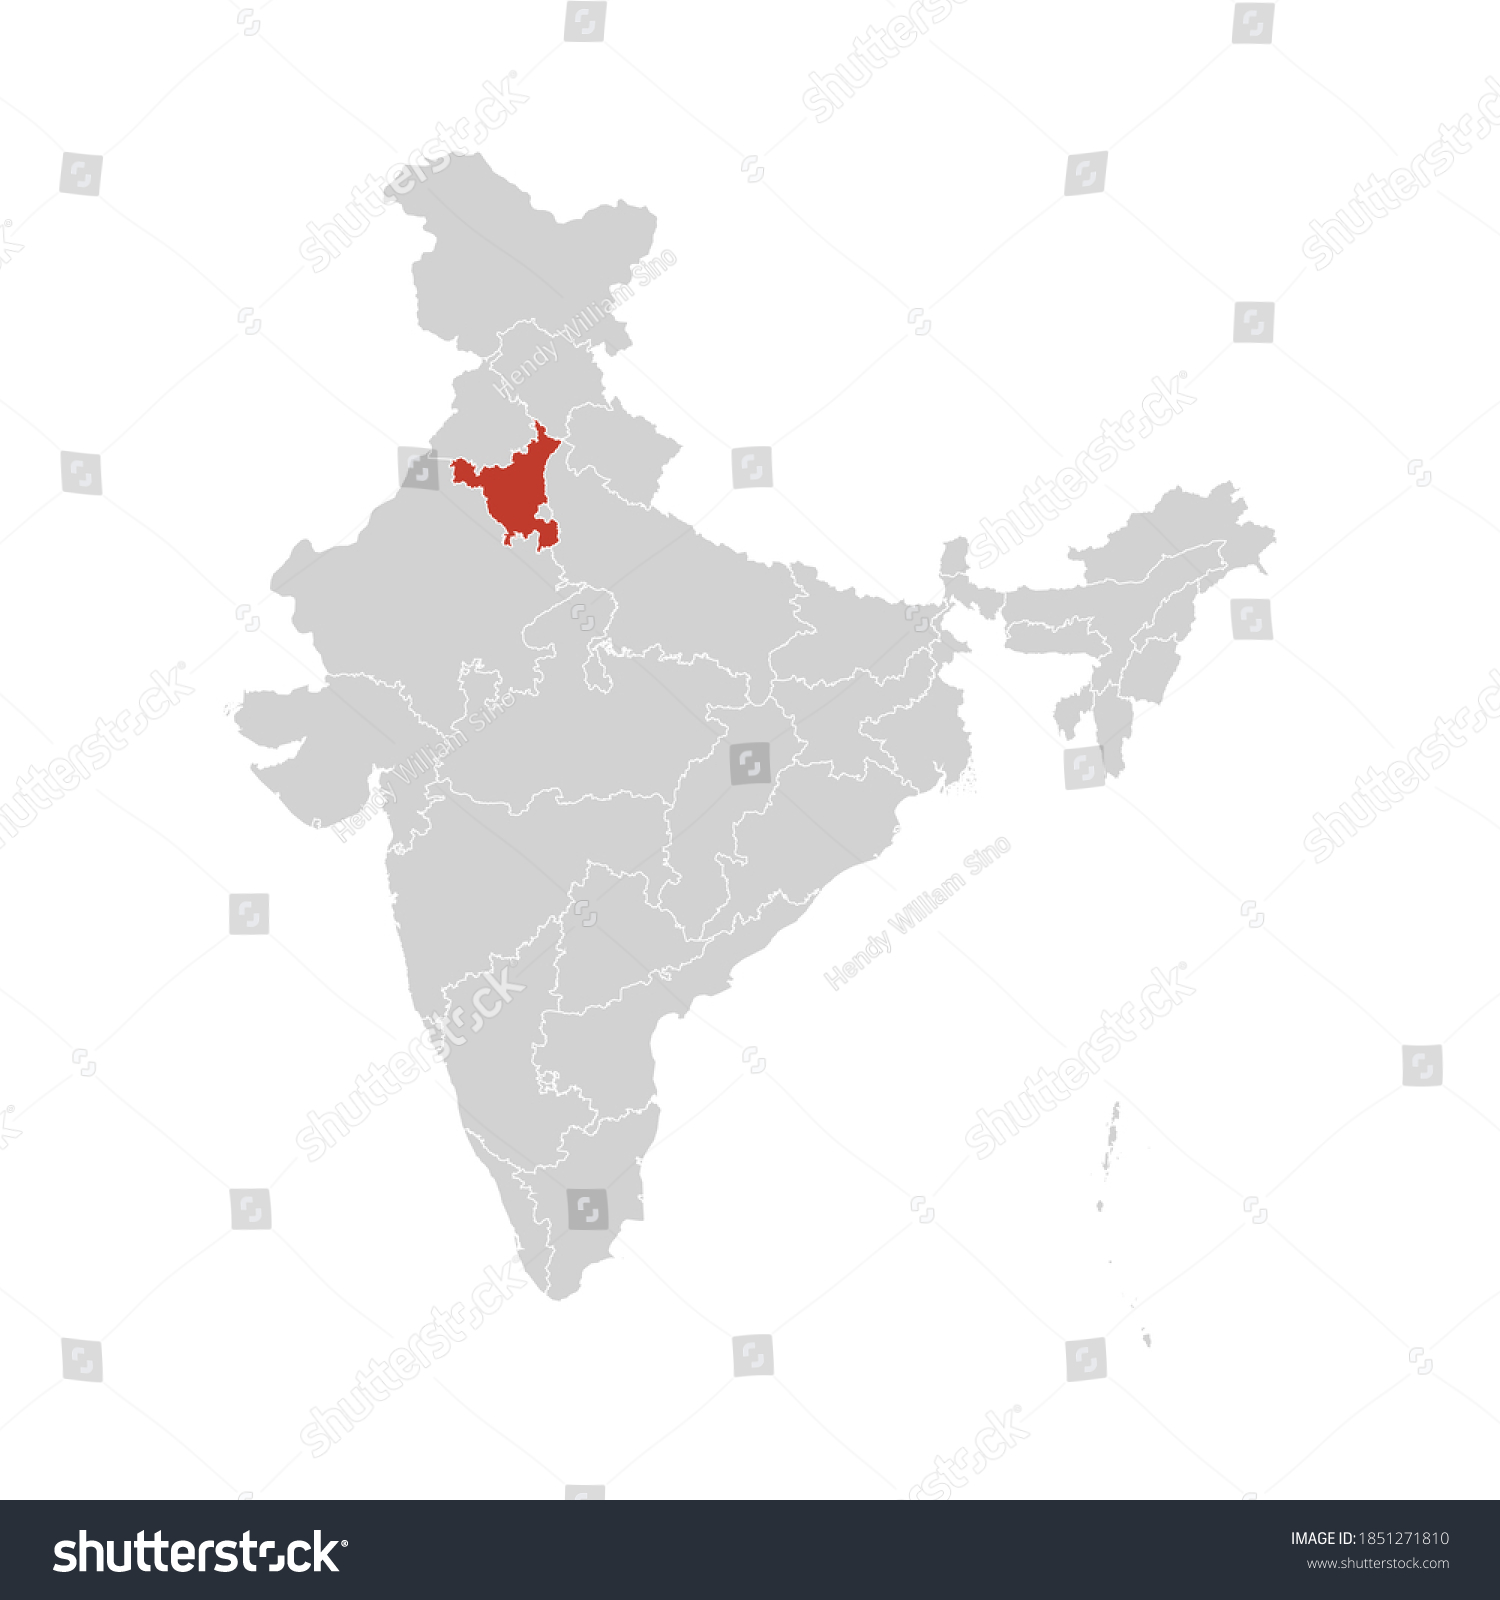 Haryana In Map Of India Haryana Highlighted On India Map Eps Stock Vector (Royalty Free) 1851271810  | Shutterstock